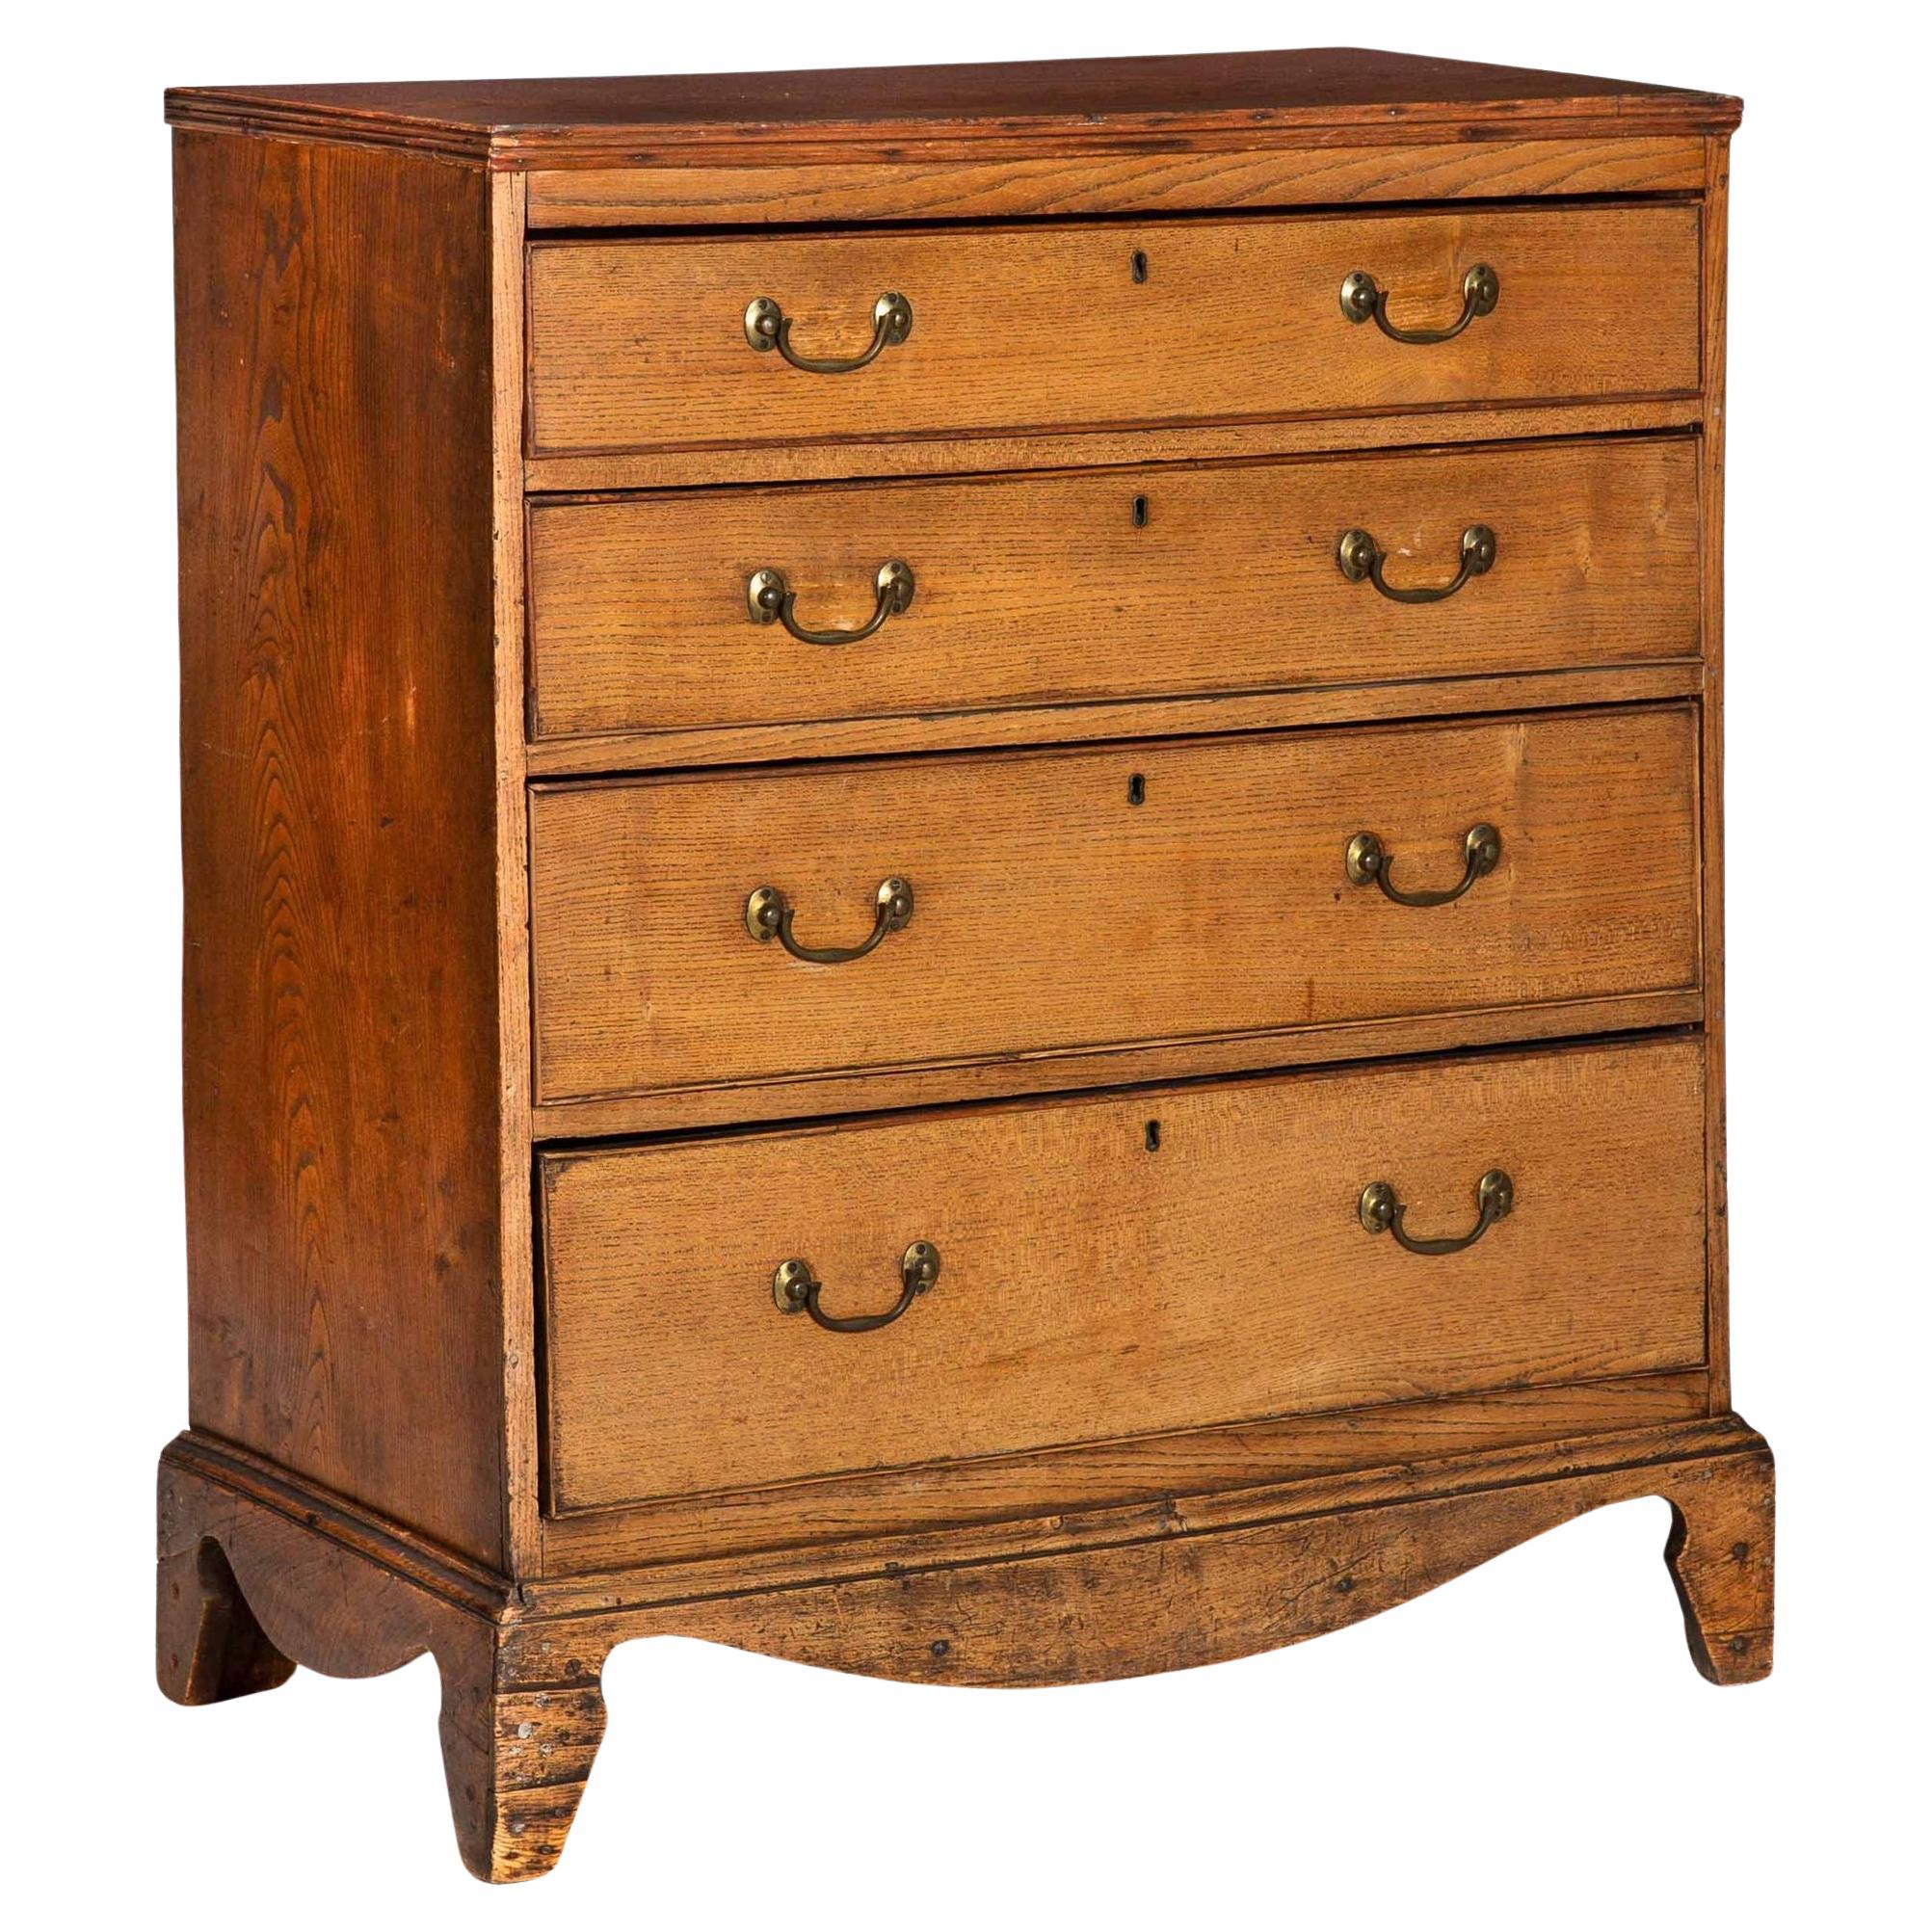 English Antique Patinated Worn Elm Chest of Drawers, Early 19th Century For Sale